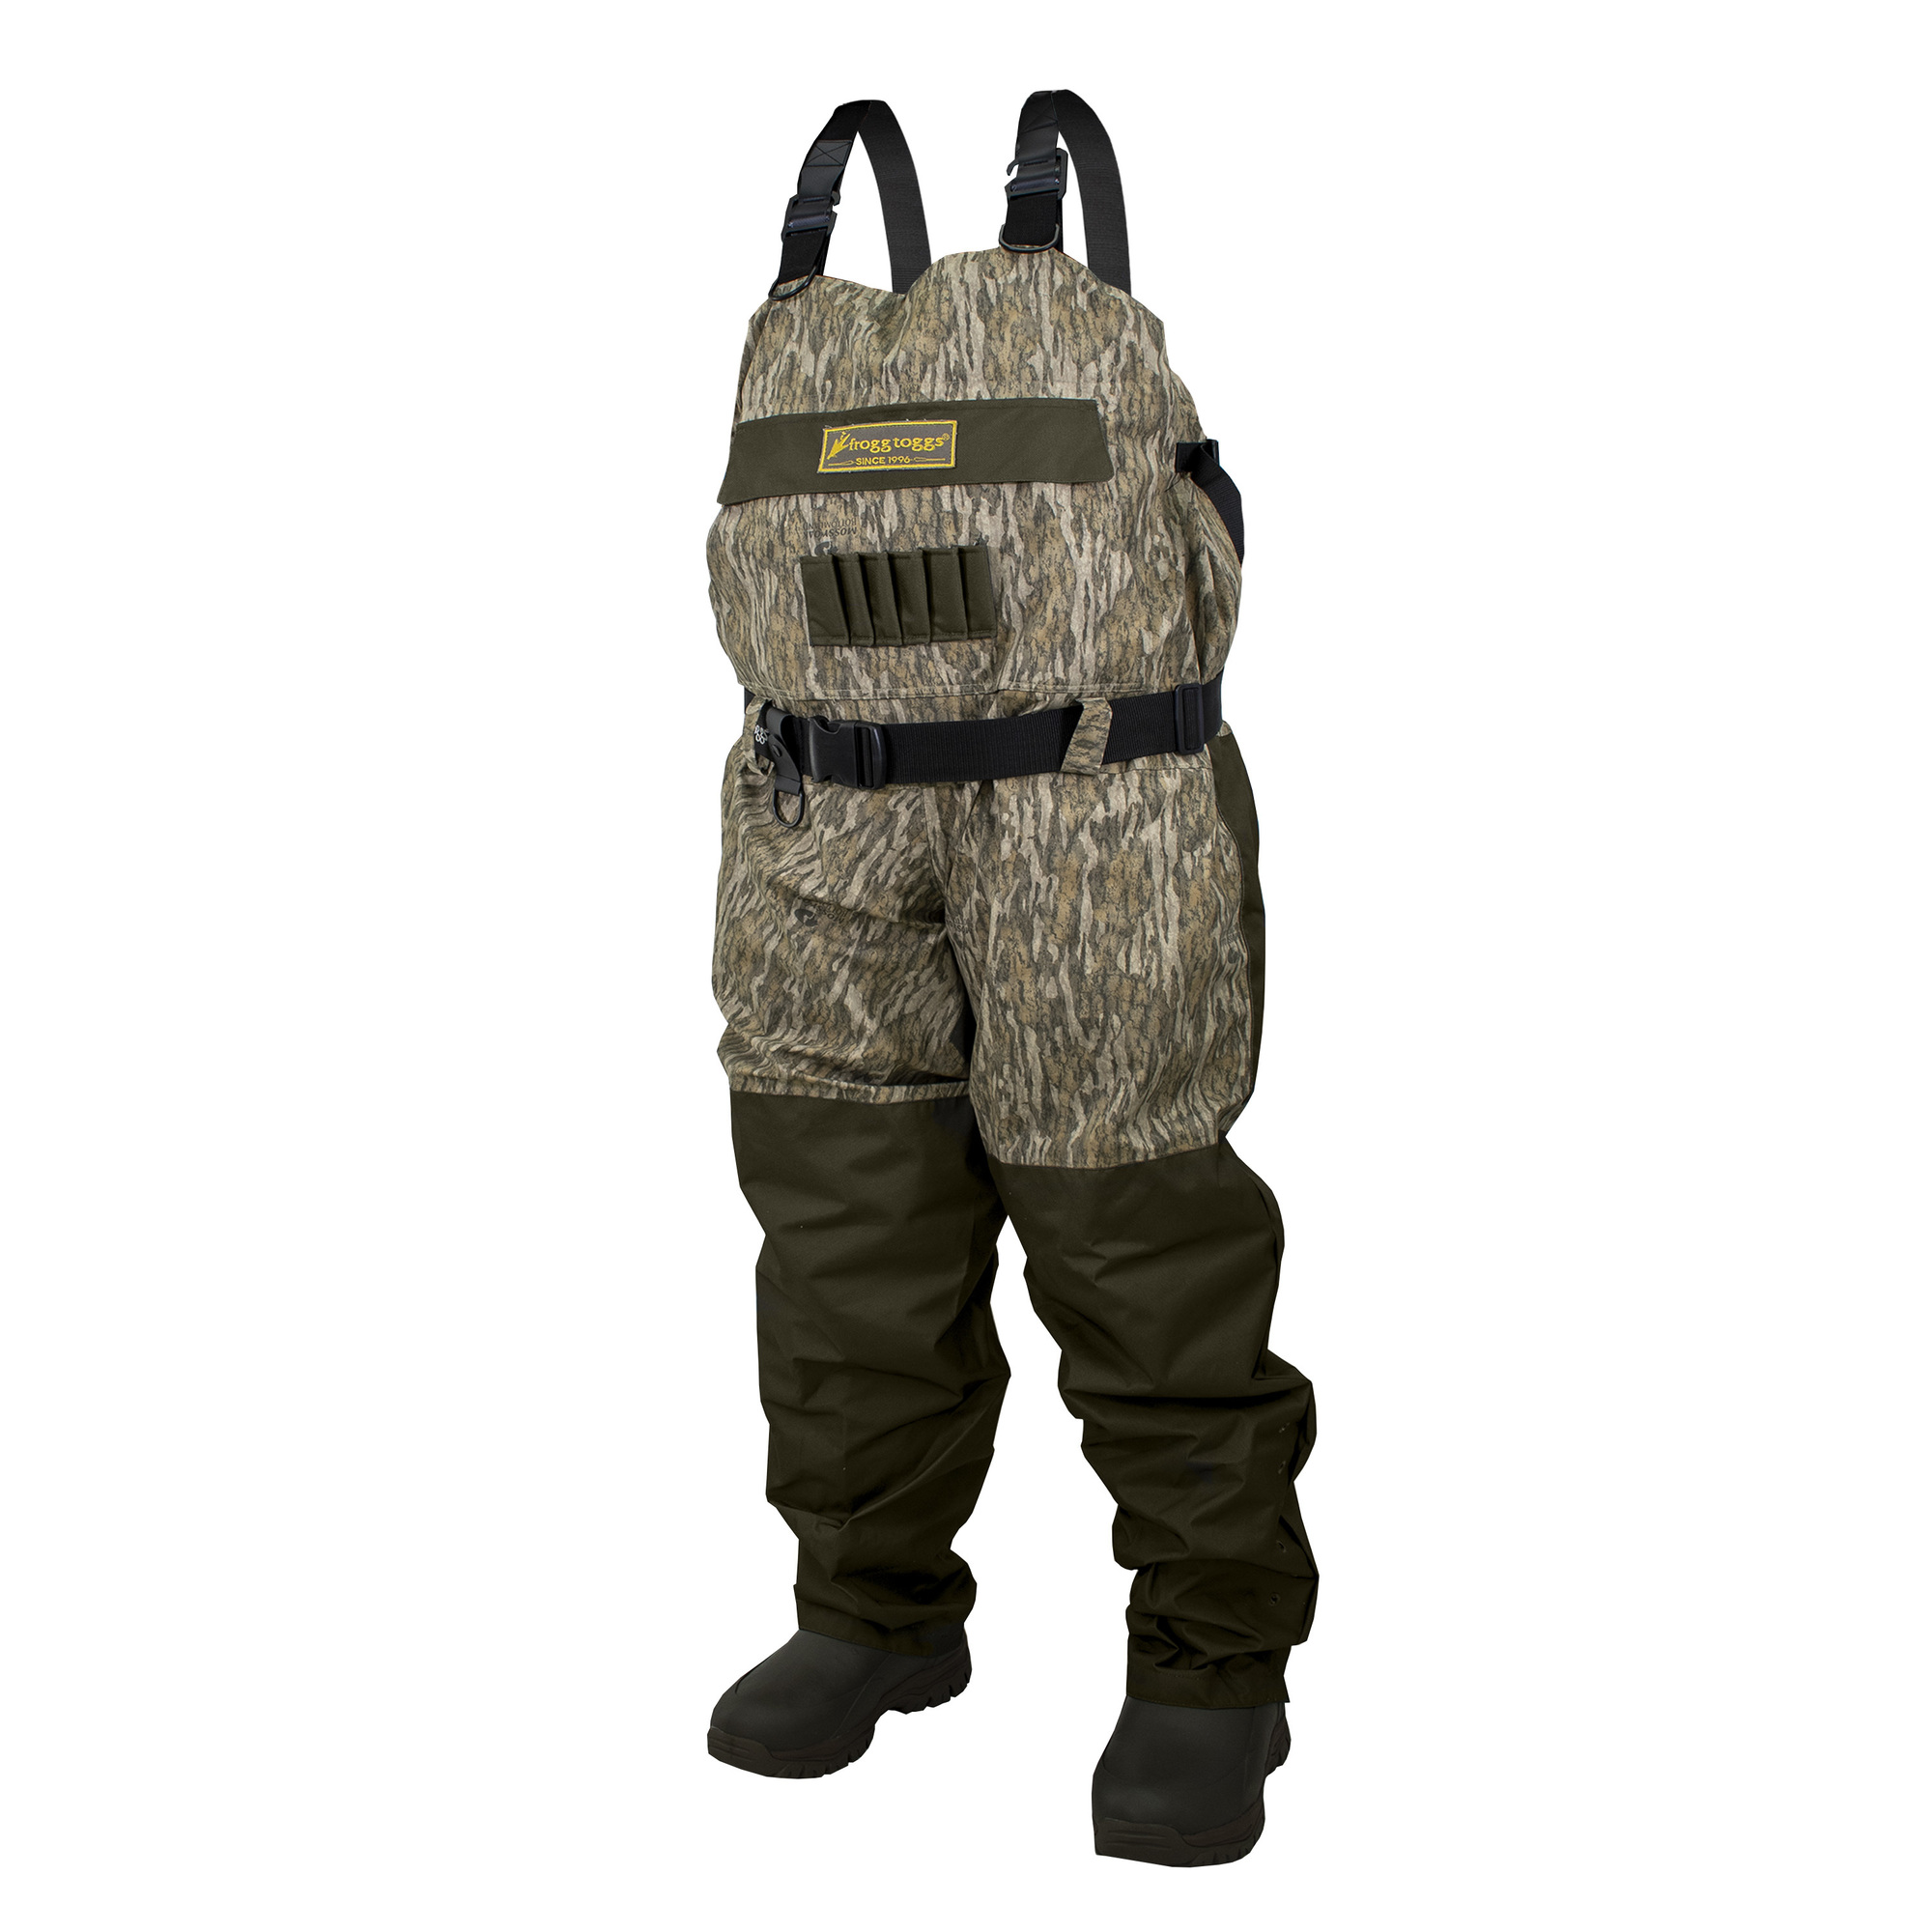 Frogg Toggs Men's Legend Series 2-N-1 Wader | Mossy Oak Bottomland | Size 12, Brown